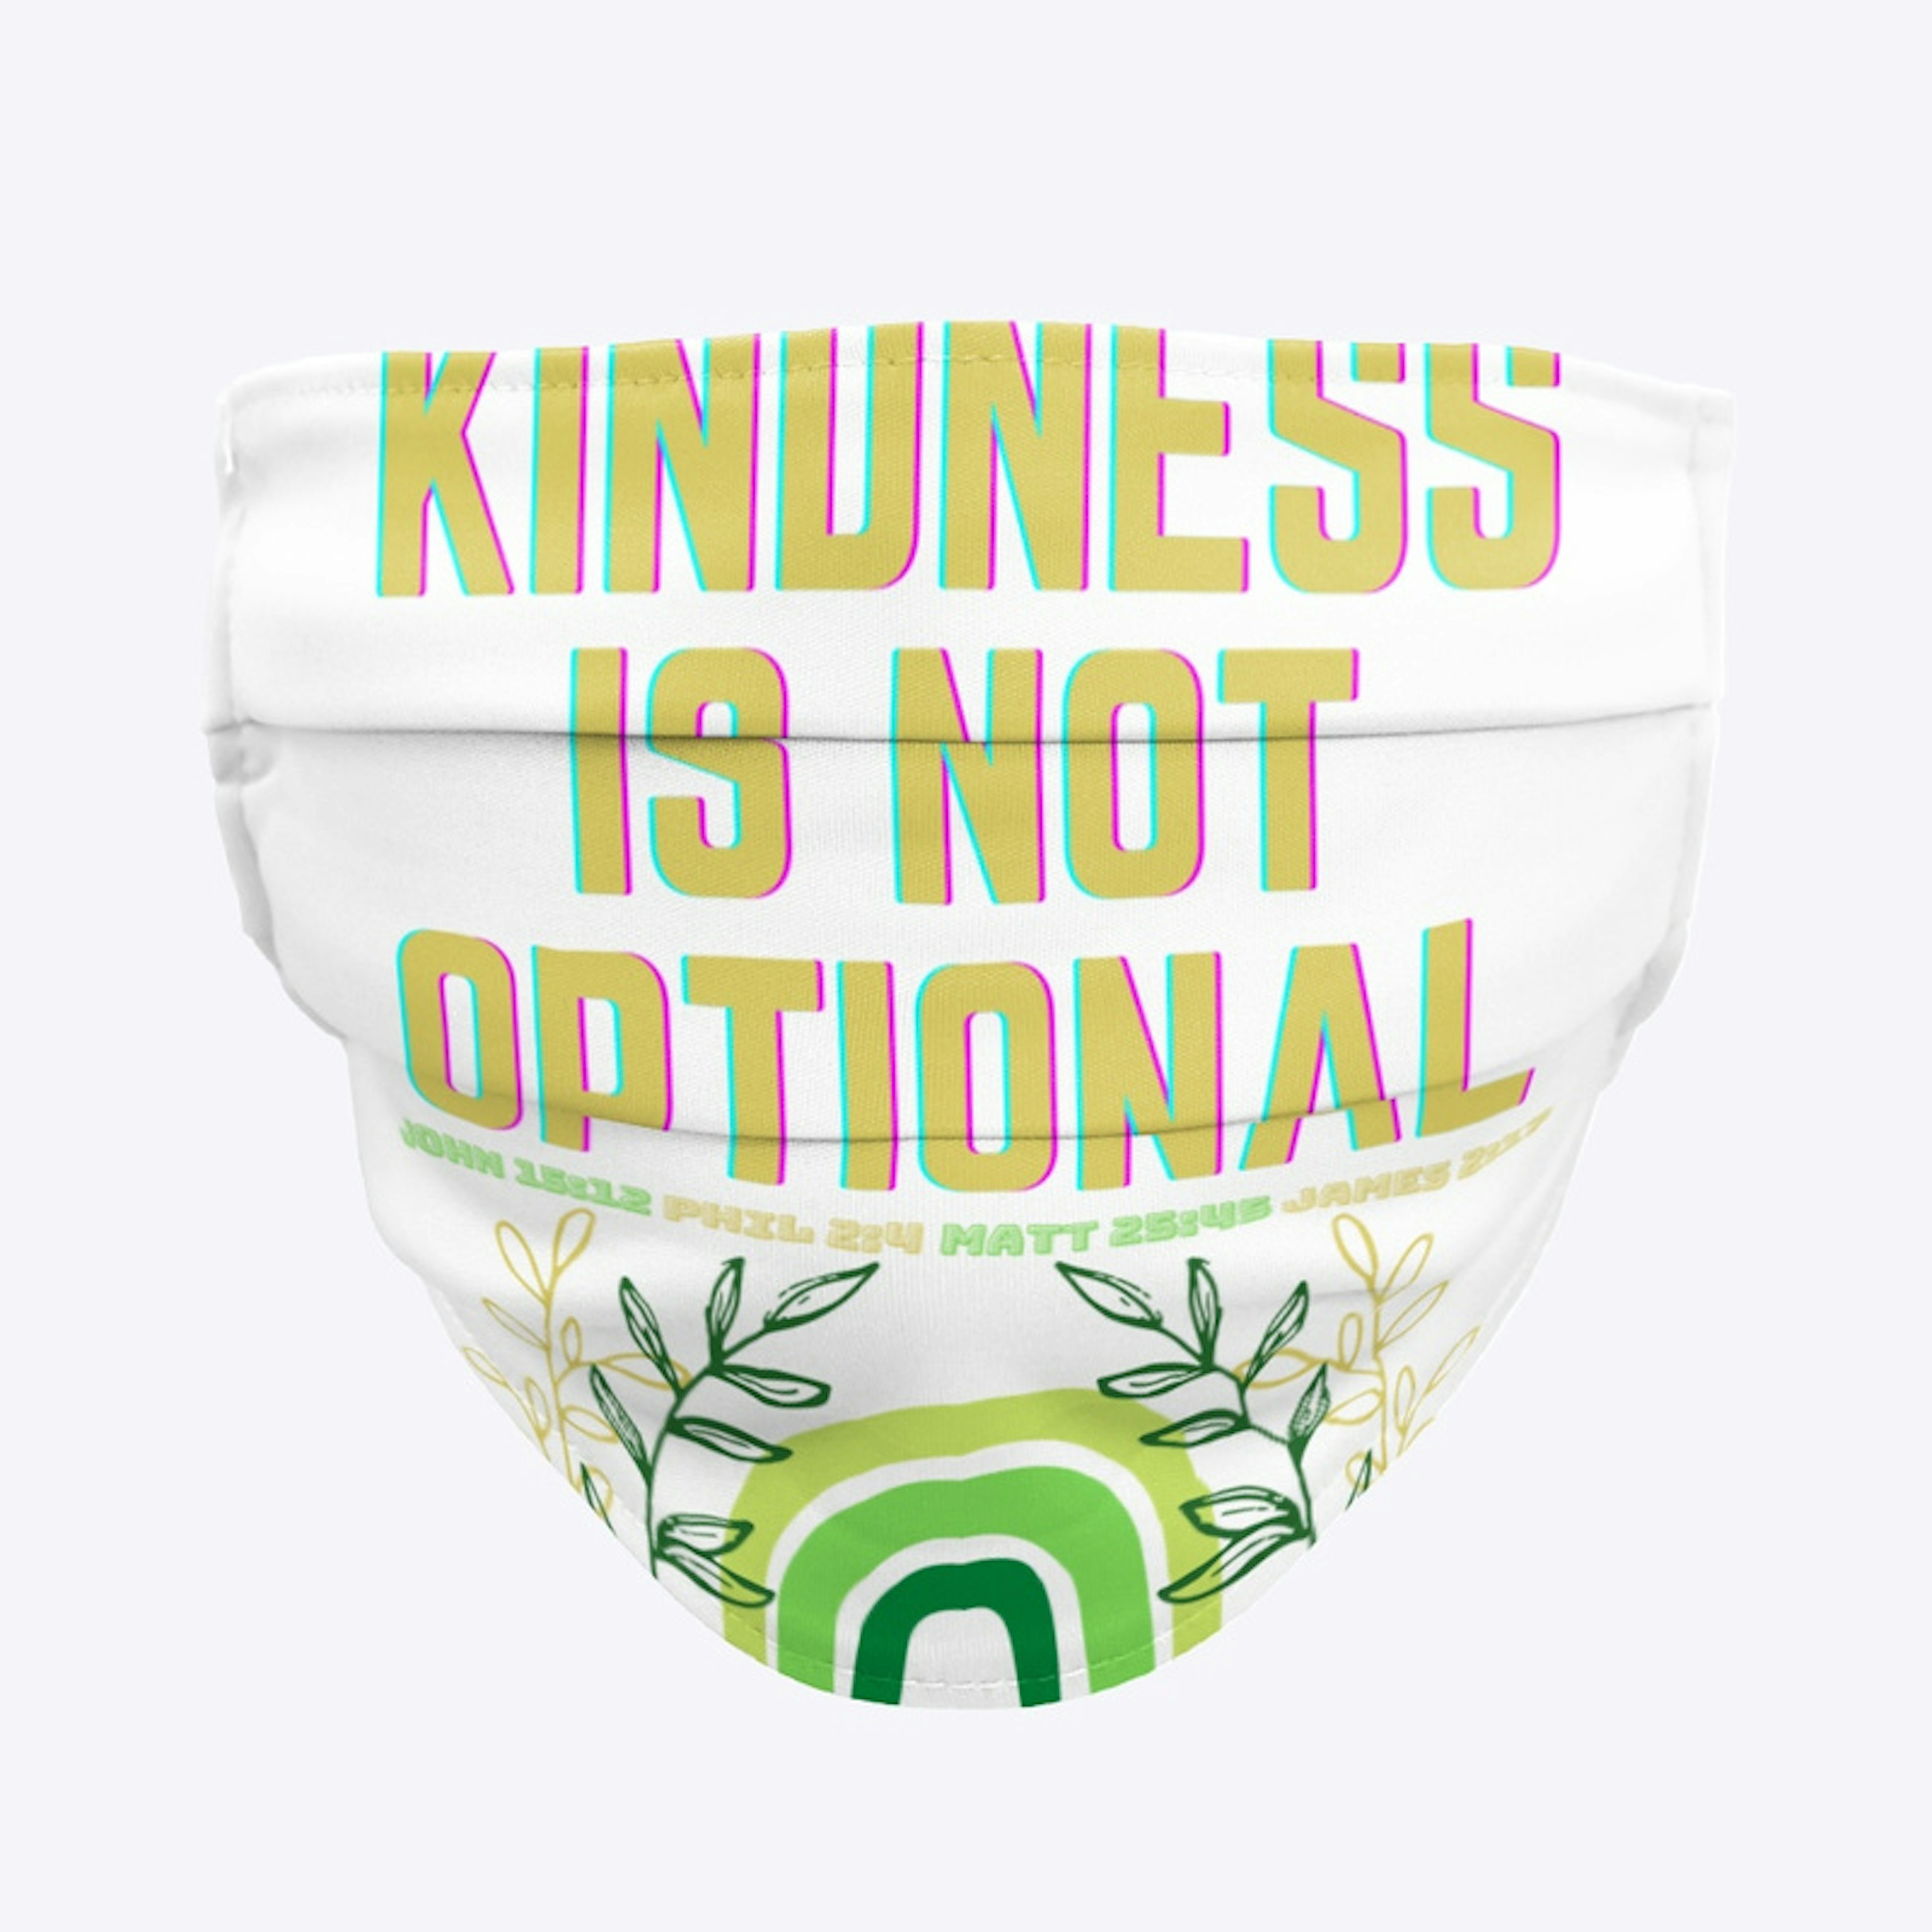 Kindness is not optional